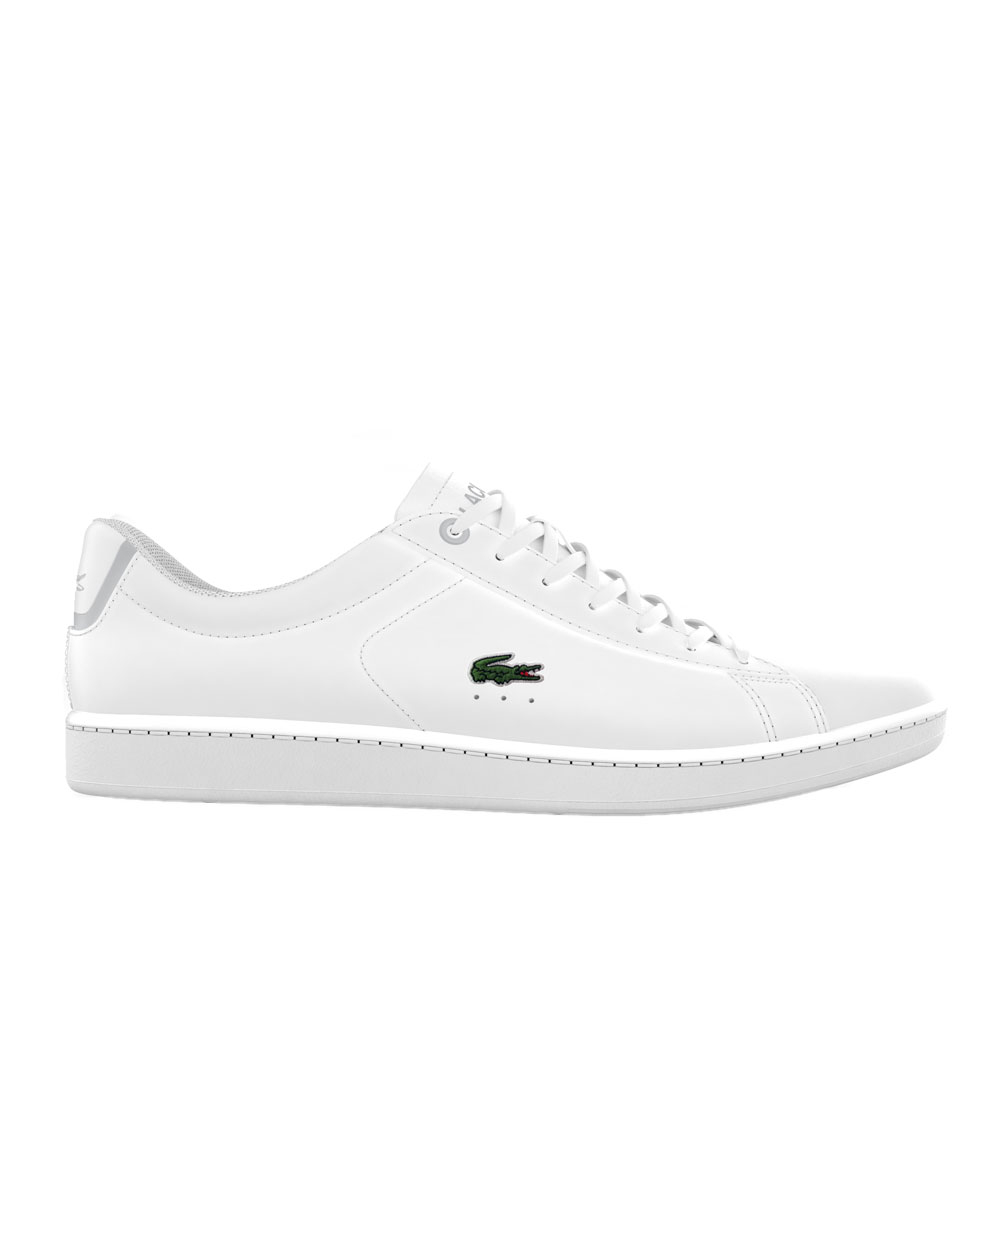 Lacoste Carnaby BL2 1 SMA (white/white)